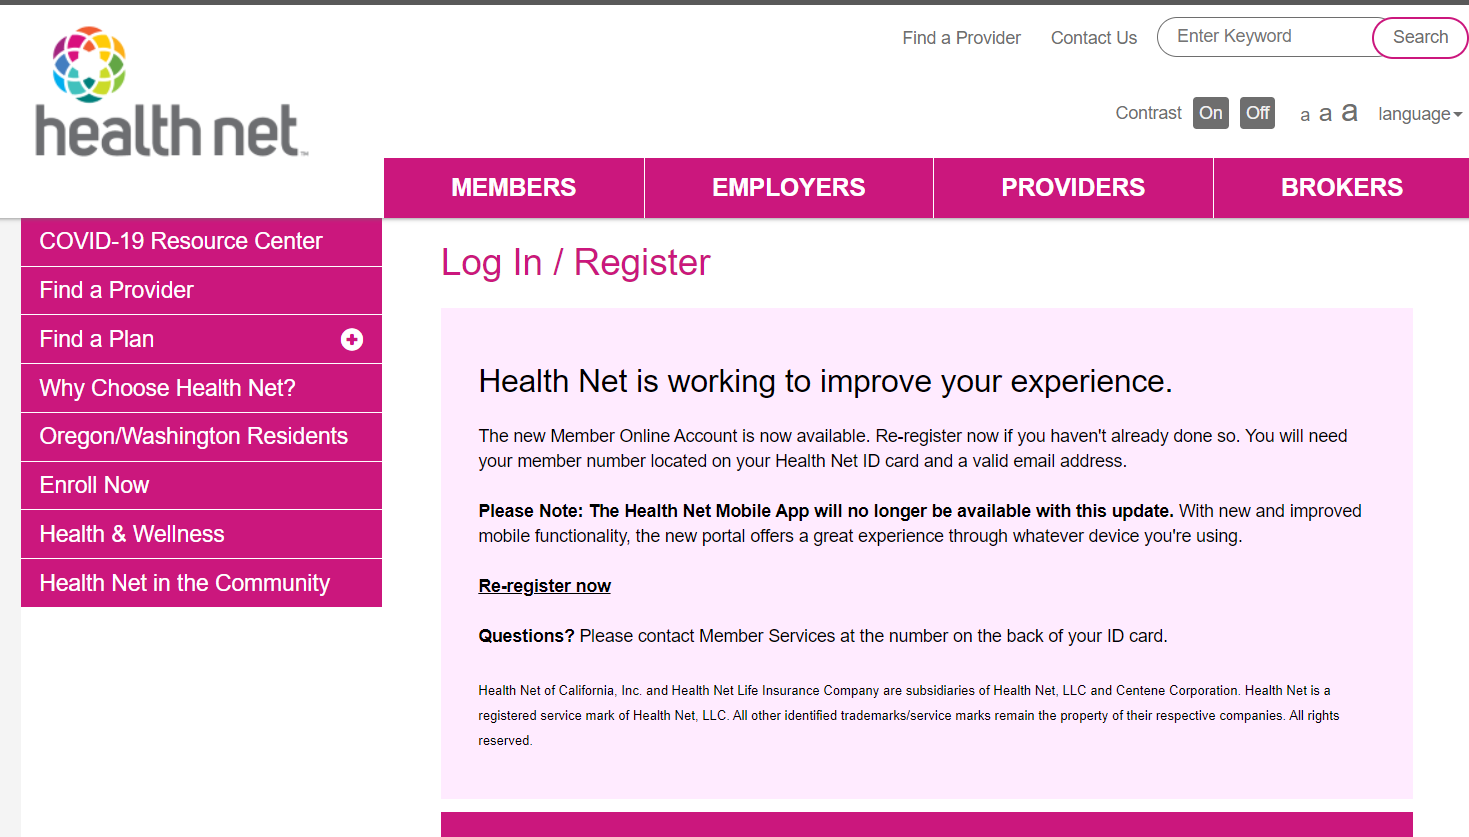 How Can I Myhealthnet Login & Guide To Www.healthnet.com